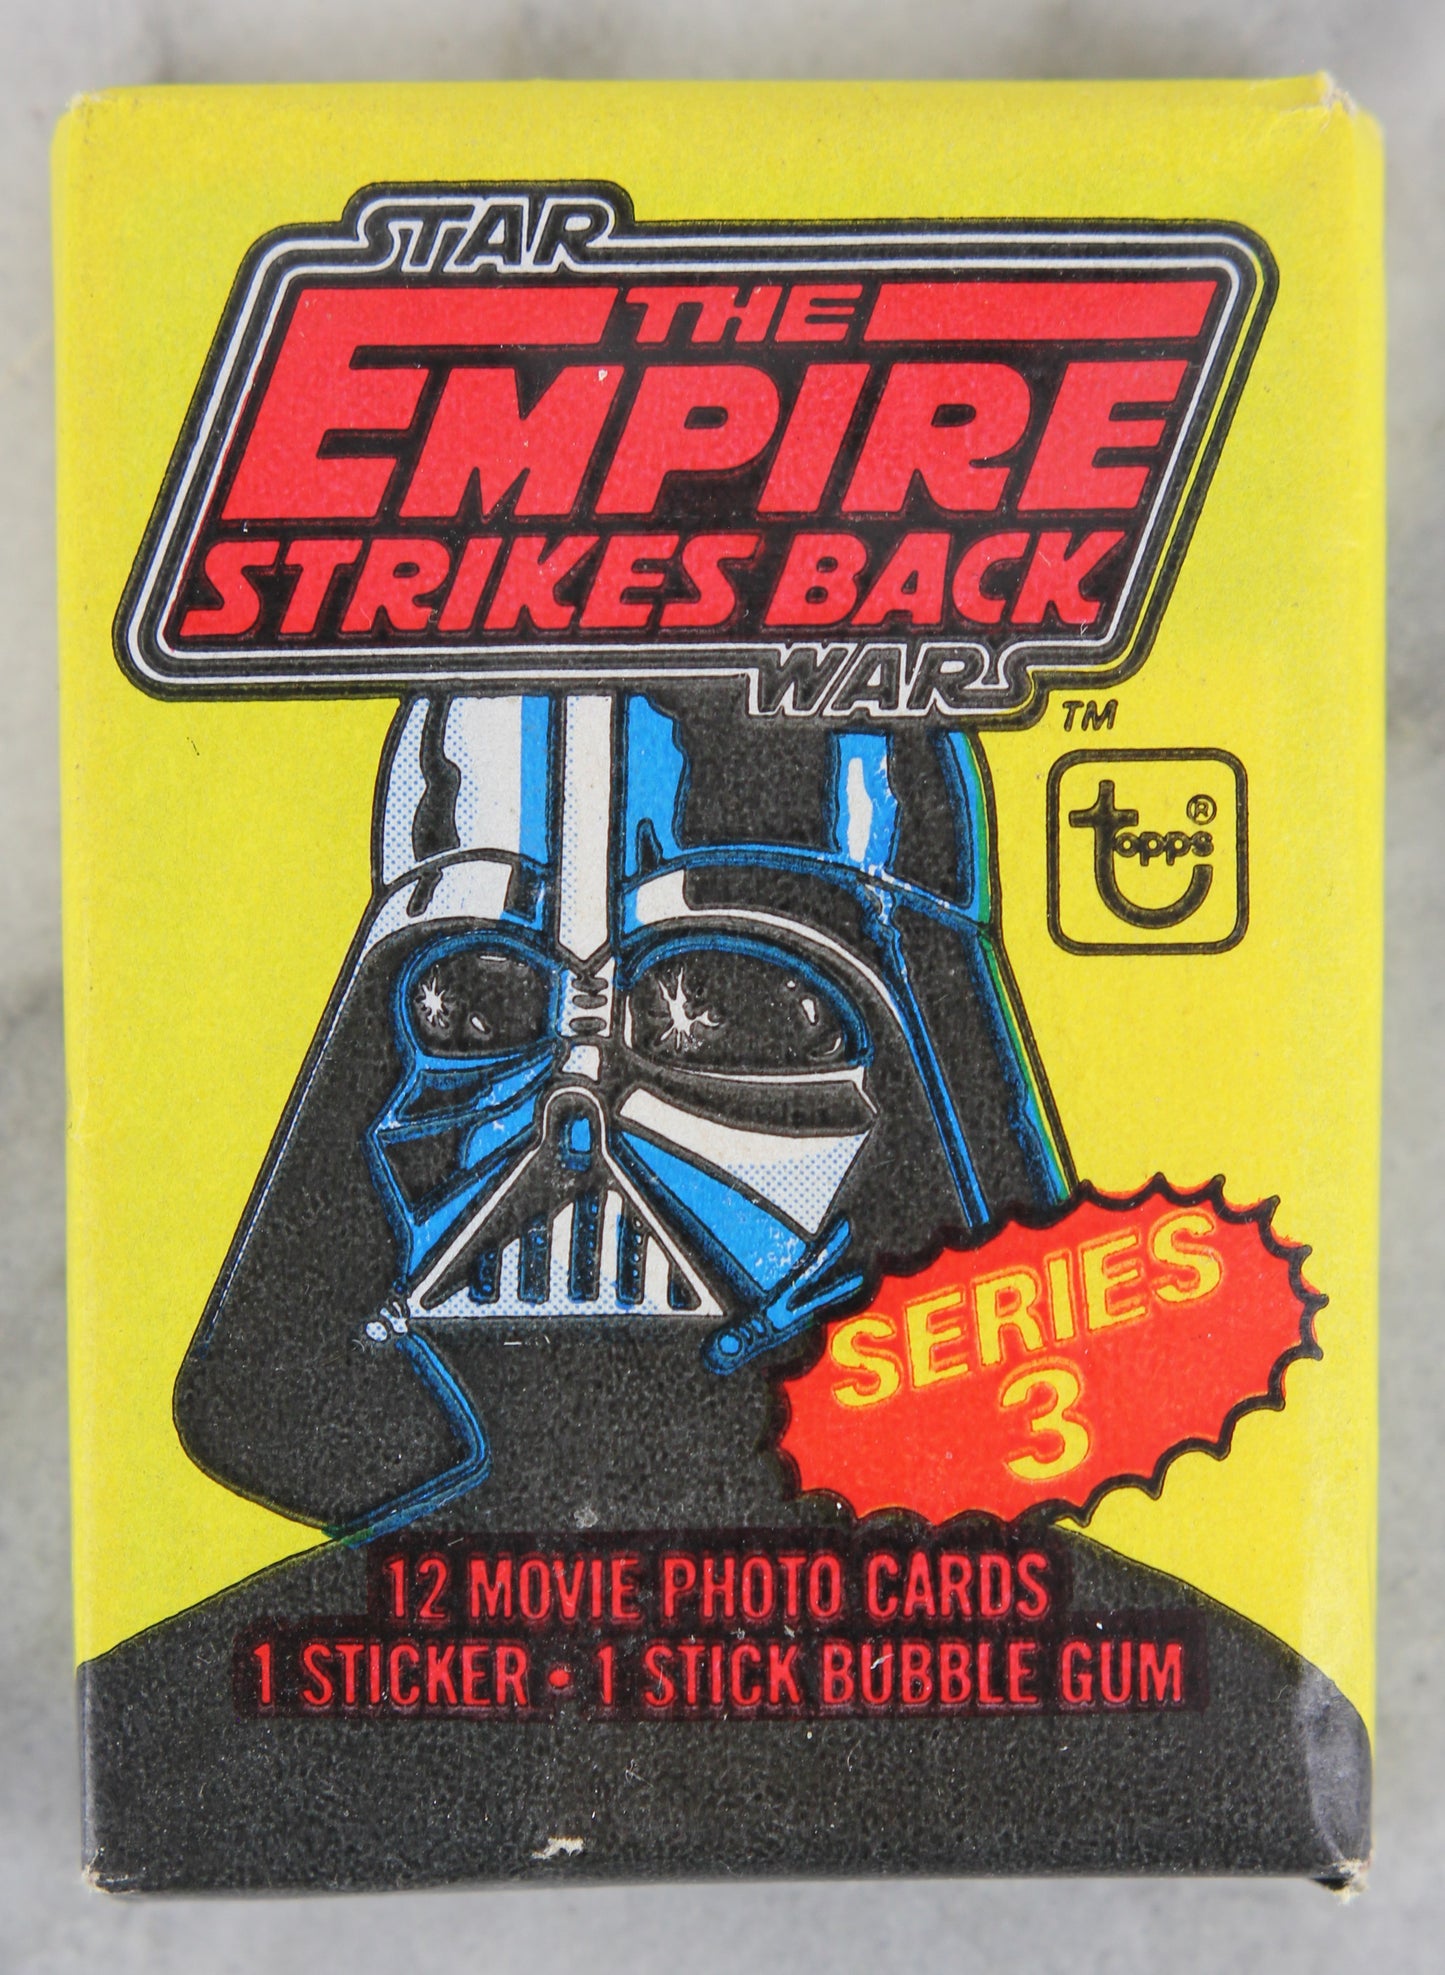 Topps Star Wars The Empire Strikes Back Series 3 Collectible Trading Cards, One Wax Pack, 1980